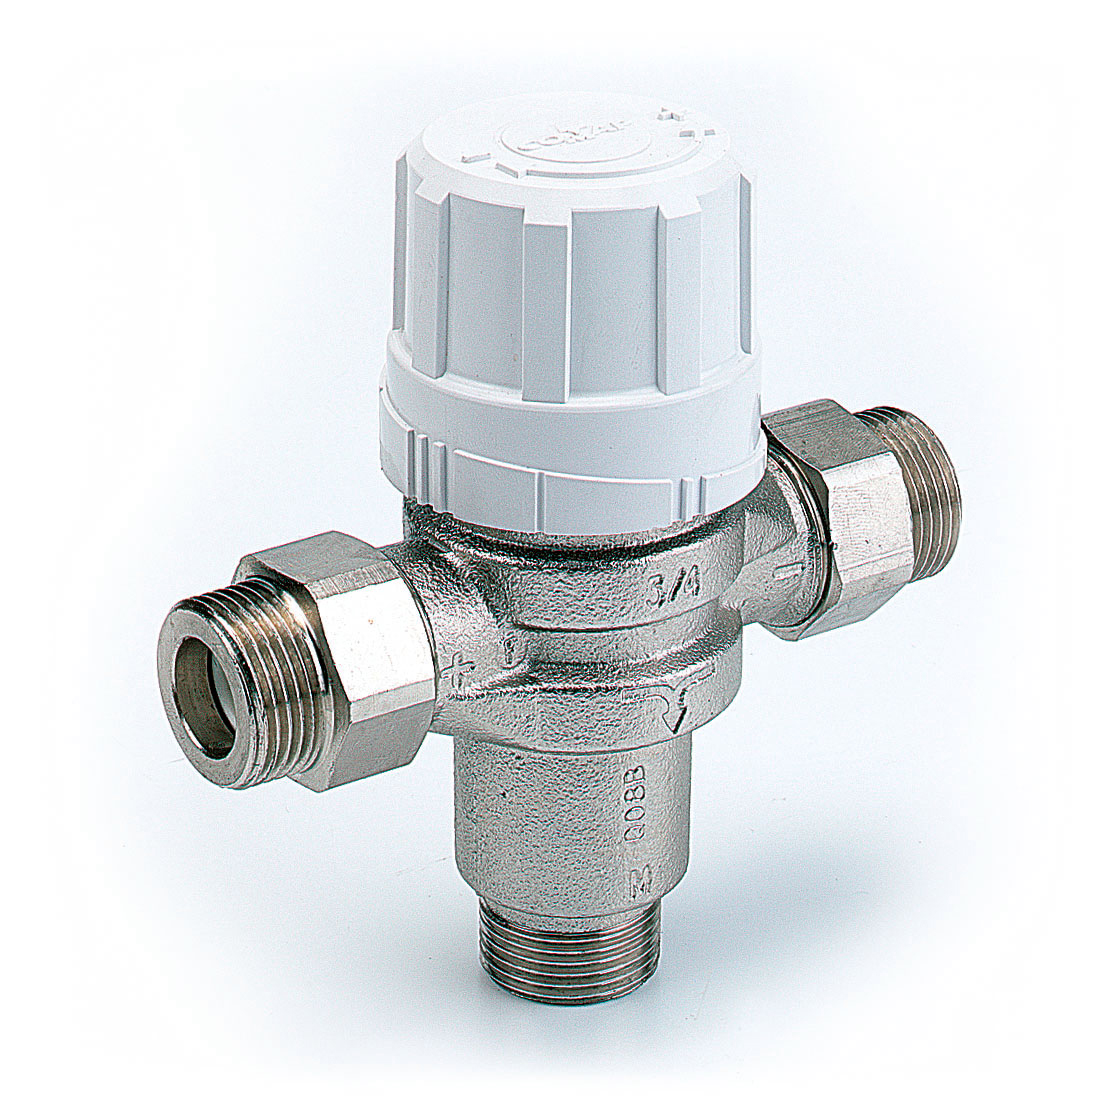 Thermostatic mixing valve for sanitary piping